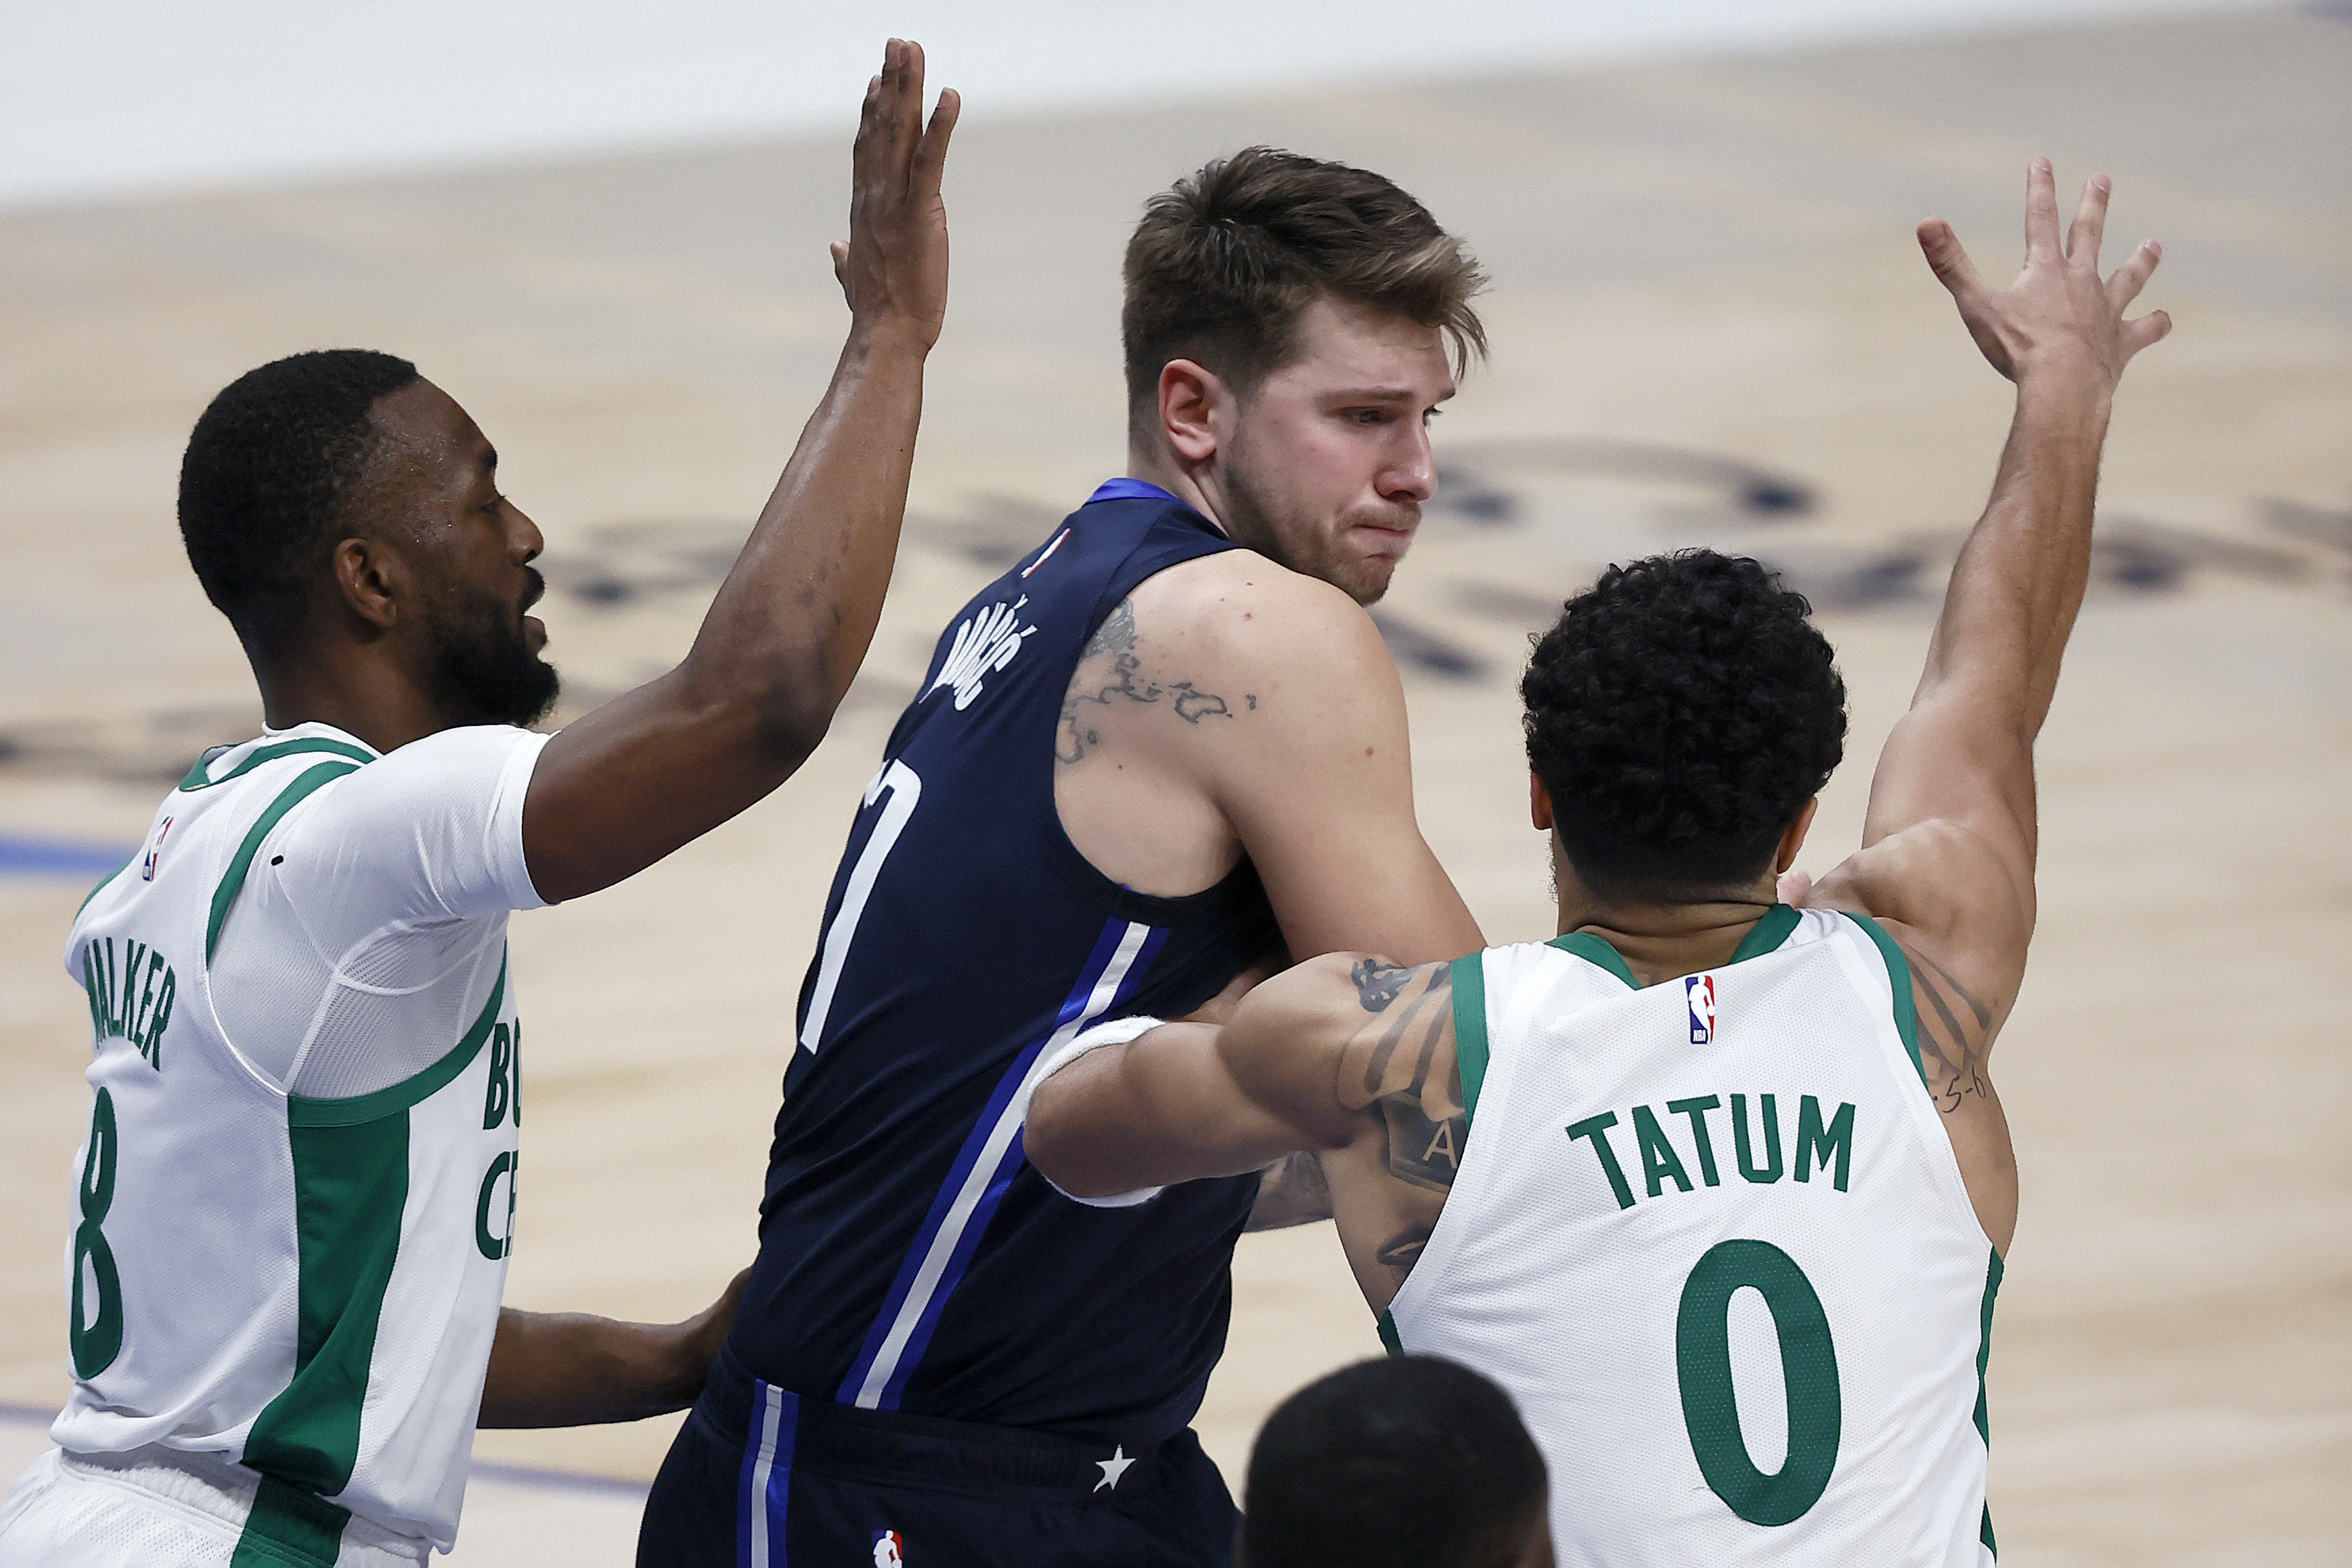 The Mavericks lose Luka Doncic for at least a couple of games after